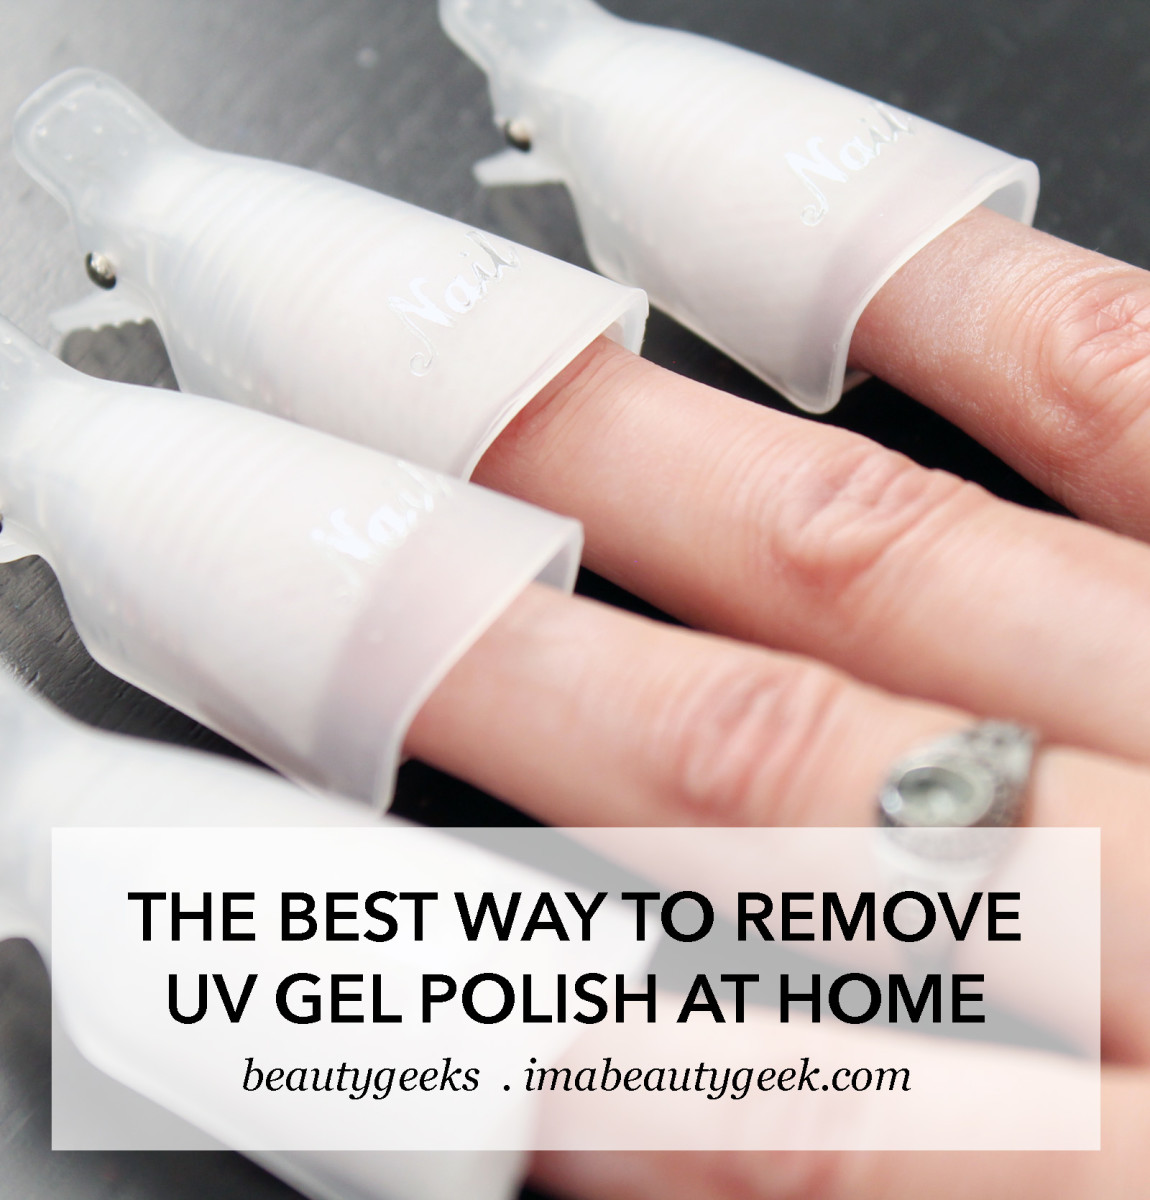 The Best Techniques for Safe Soak-Off-Gel Removal at Home #zerodamage